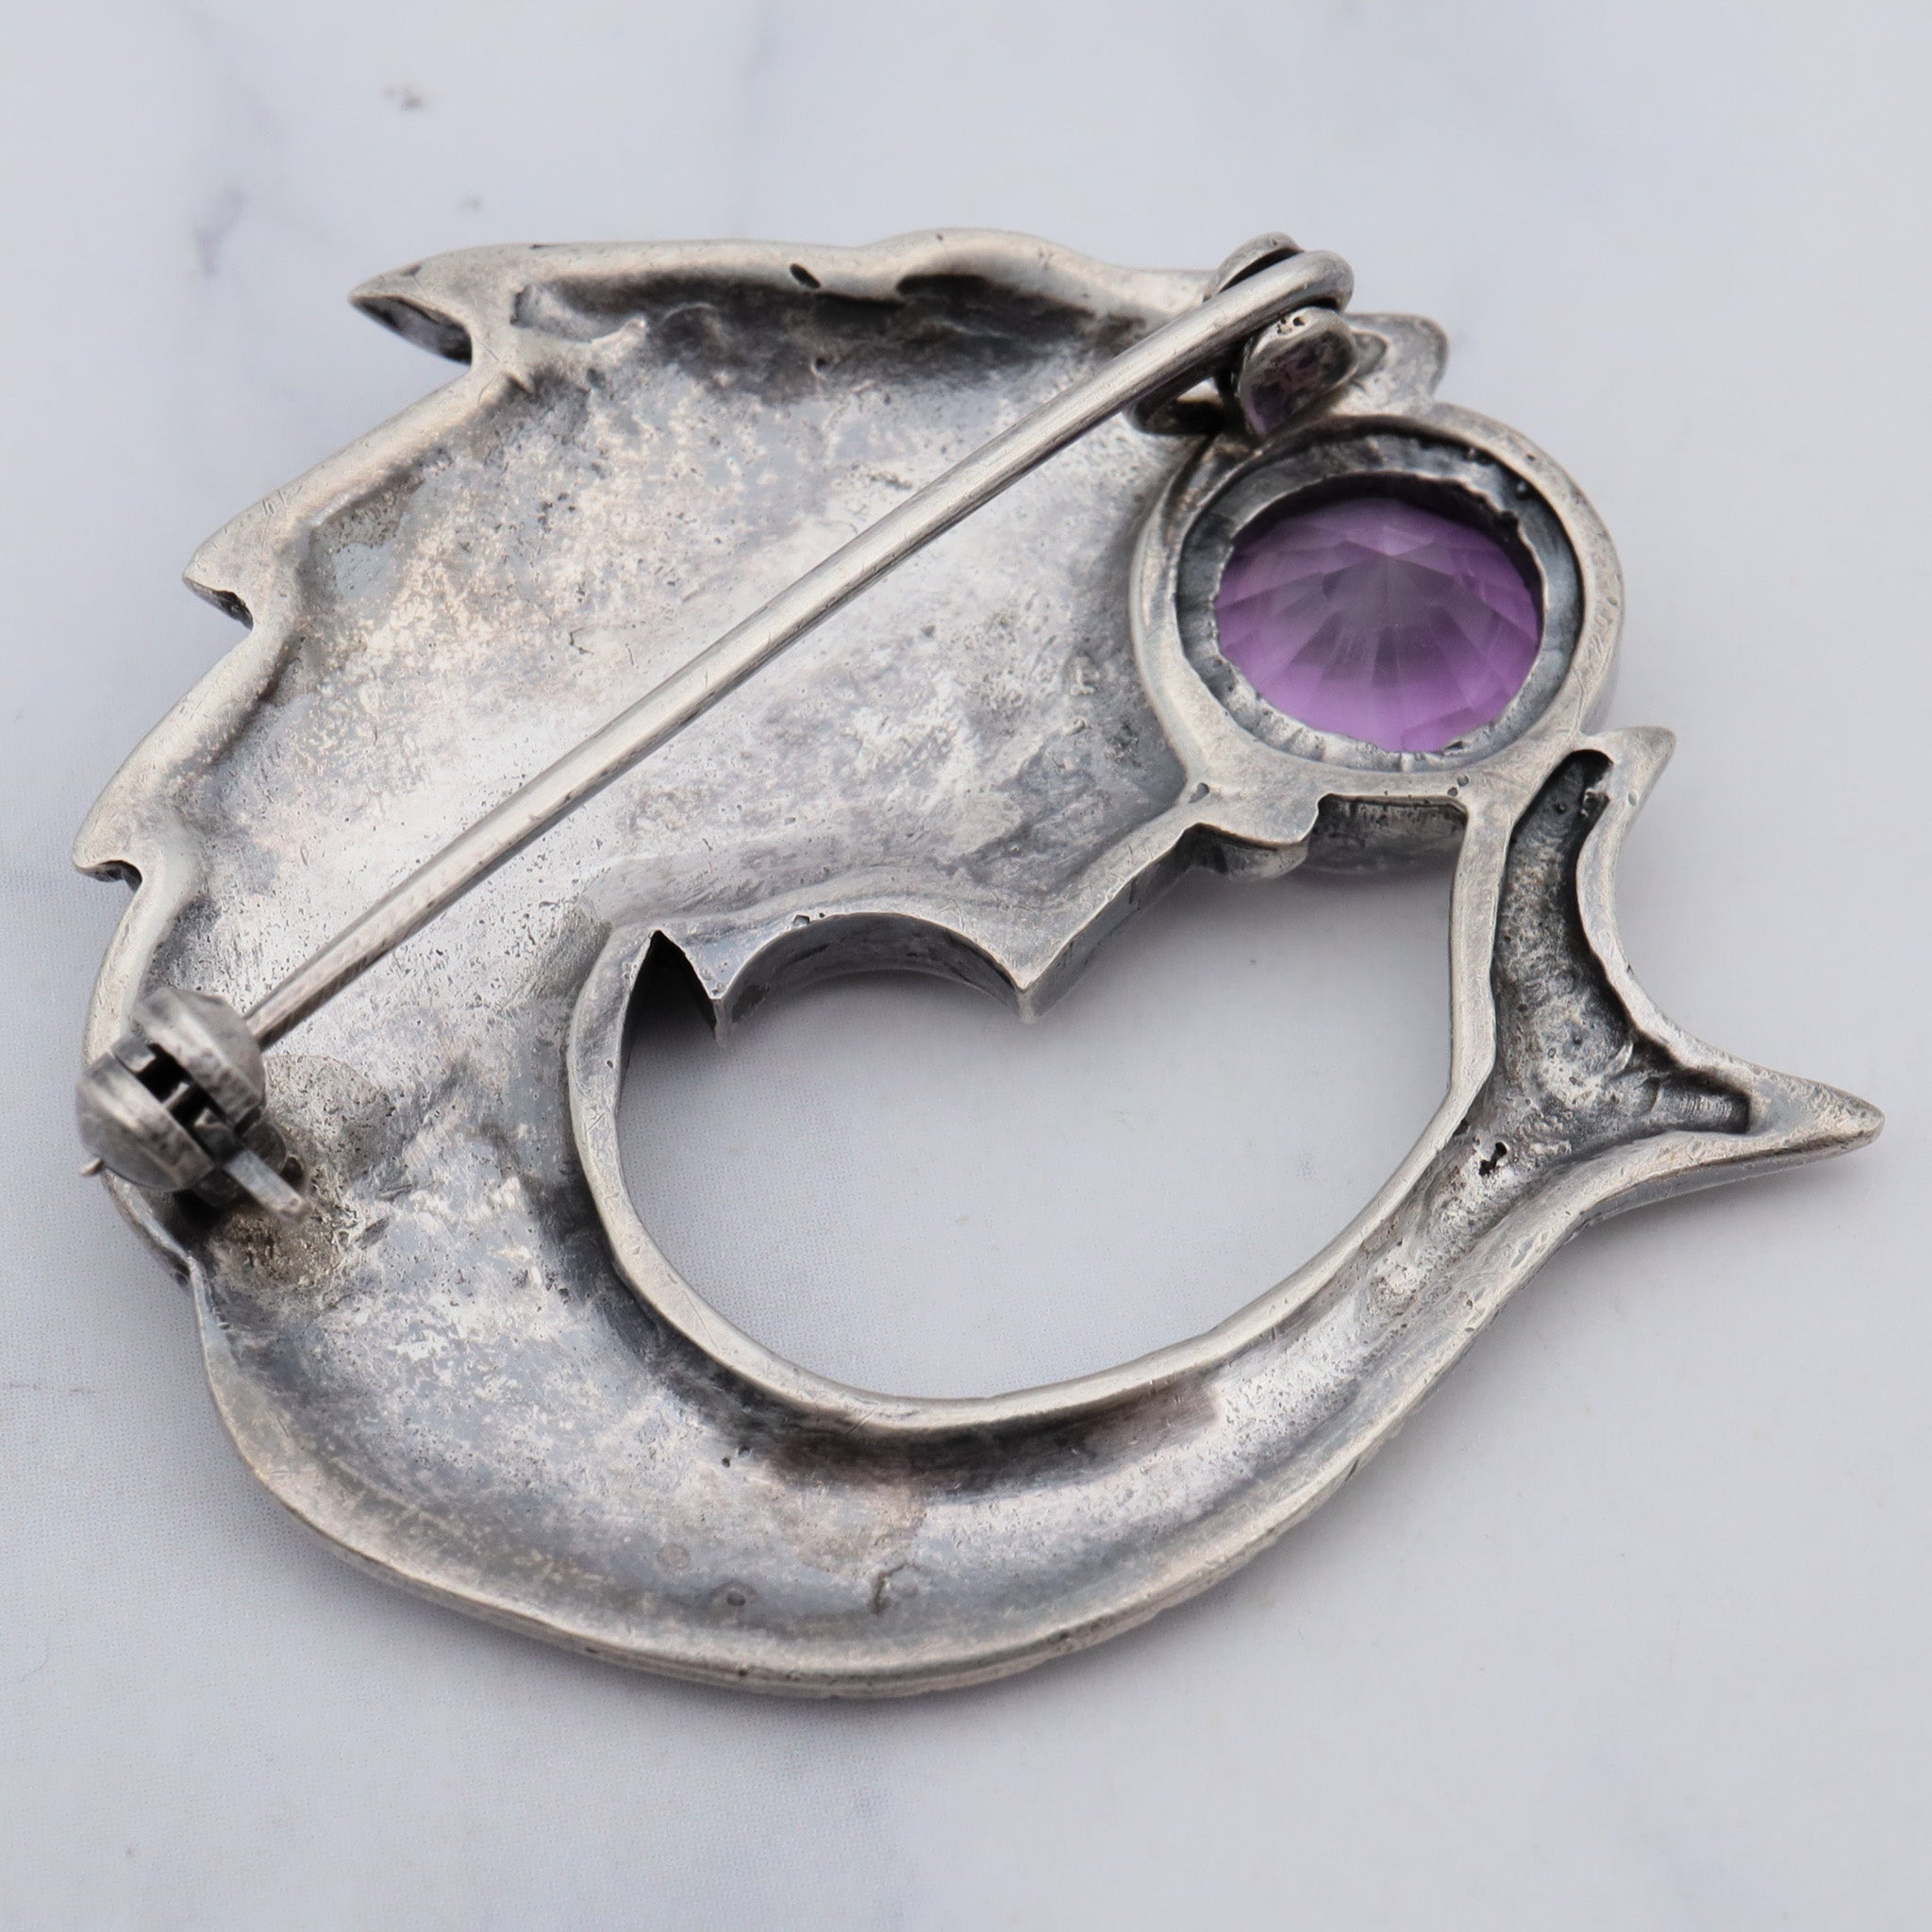 Vintage sterling February Pisces brooch with amethyst and marcasite